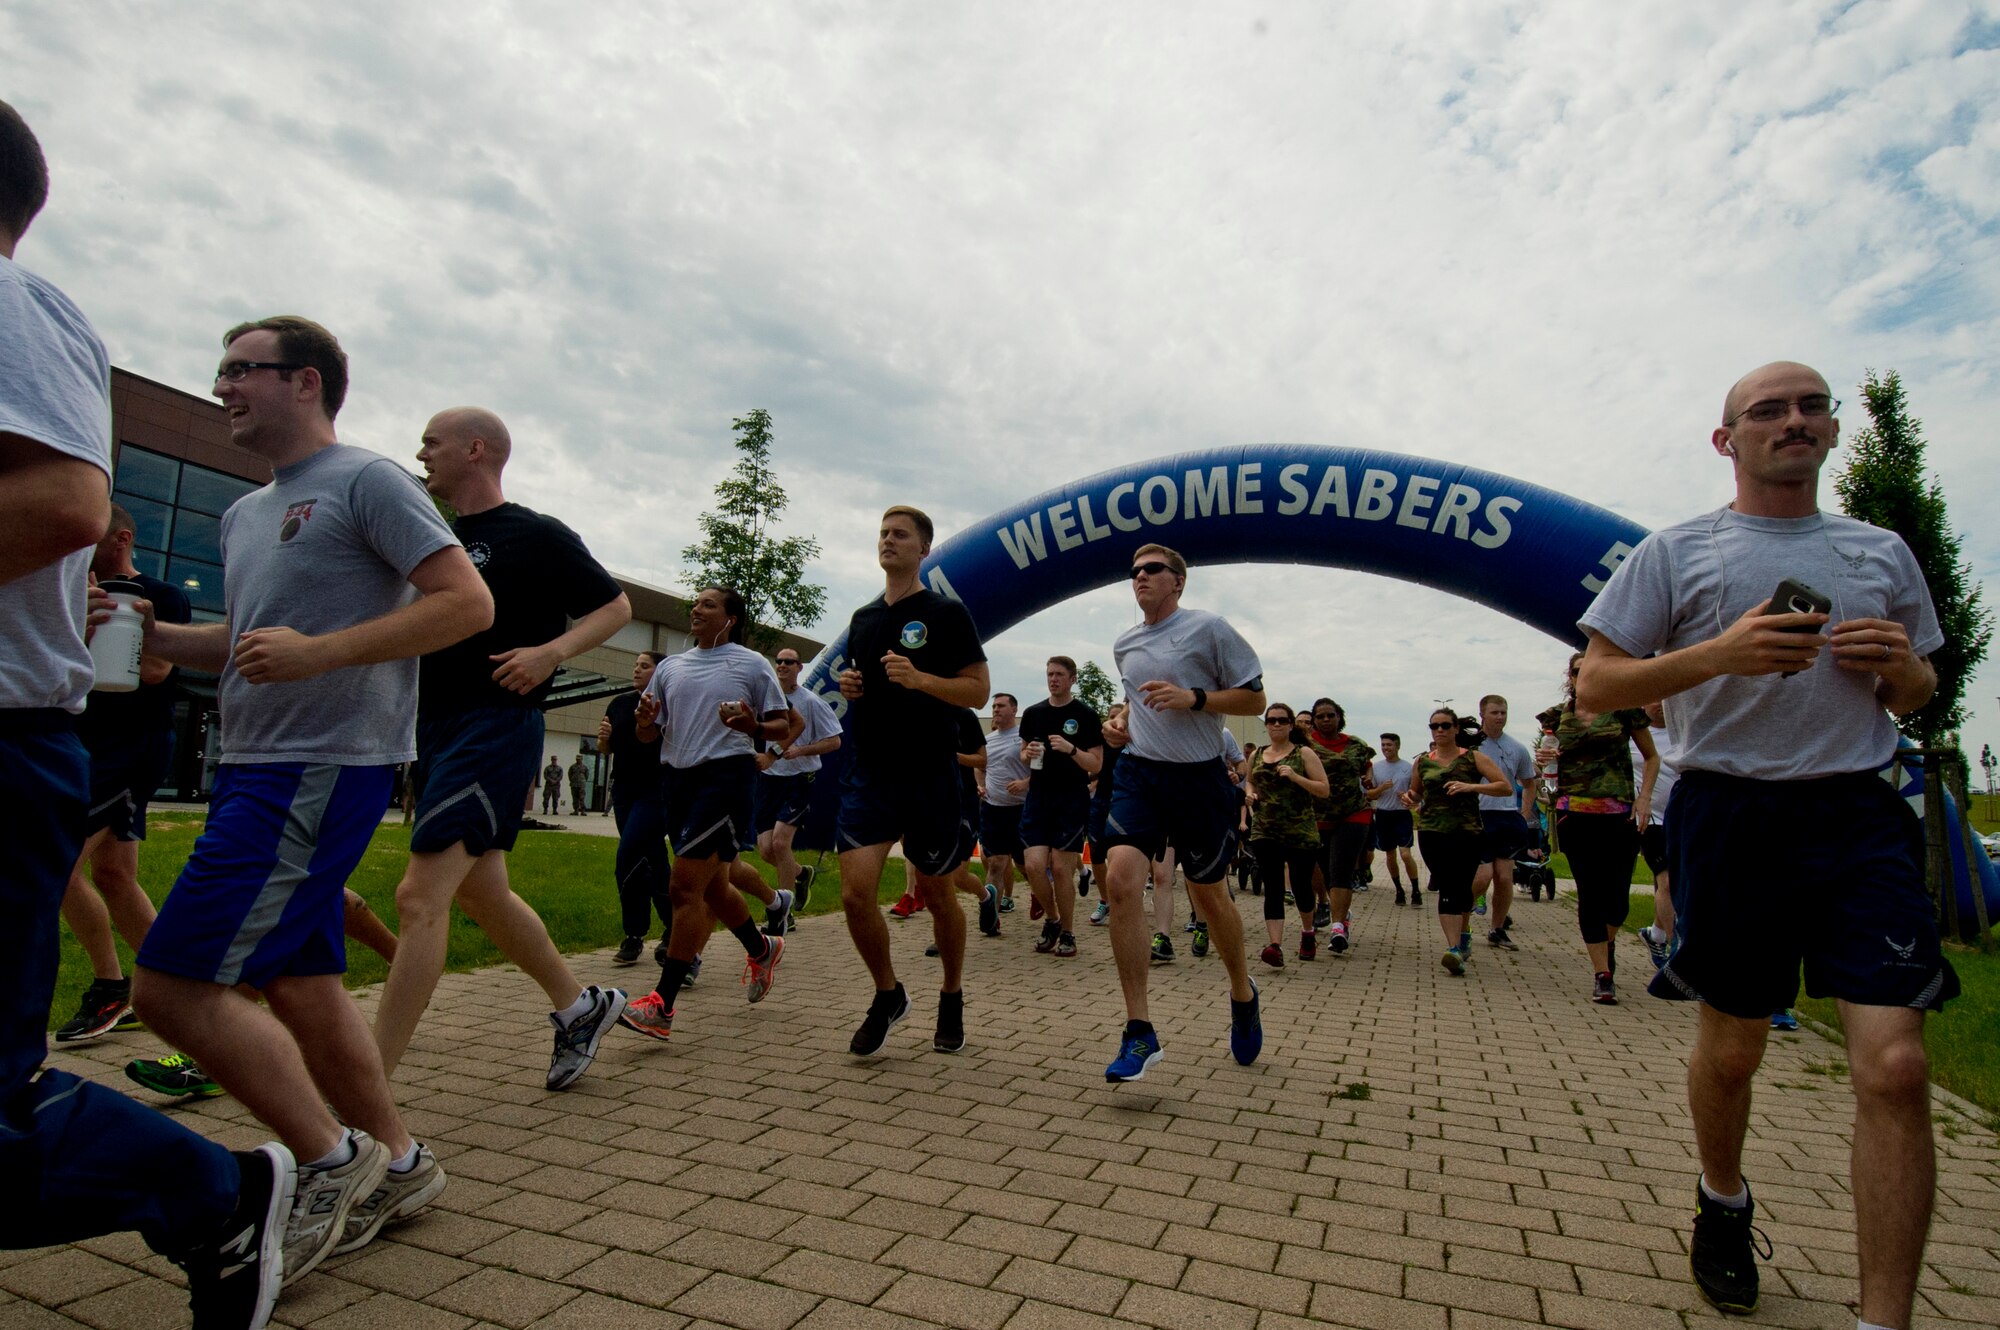 Spangdahlem Air Base Airmen run in a 5K during the "Are You the Best You Can Be?" resiliency day event at the Eifel Powerhaus fitness center at Spangdahlem Air Base, Germany, June 24, 2016. The 52nd Aerospace Medicine Squadron's Health Promotions flight will be sponsoring a "Triple-Ribbon" 5K in honor of Breast Cancer Awareness Month, Domestic Violence Awareness Month and Prescription Drug Misuse Awareness Month outside the fitness center Oct. 7, 2016.  (U.S. Air Force photo by Staff Sgt. Joe W. McFadden/Released)
